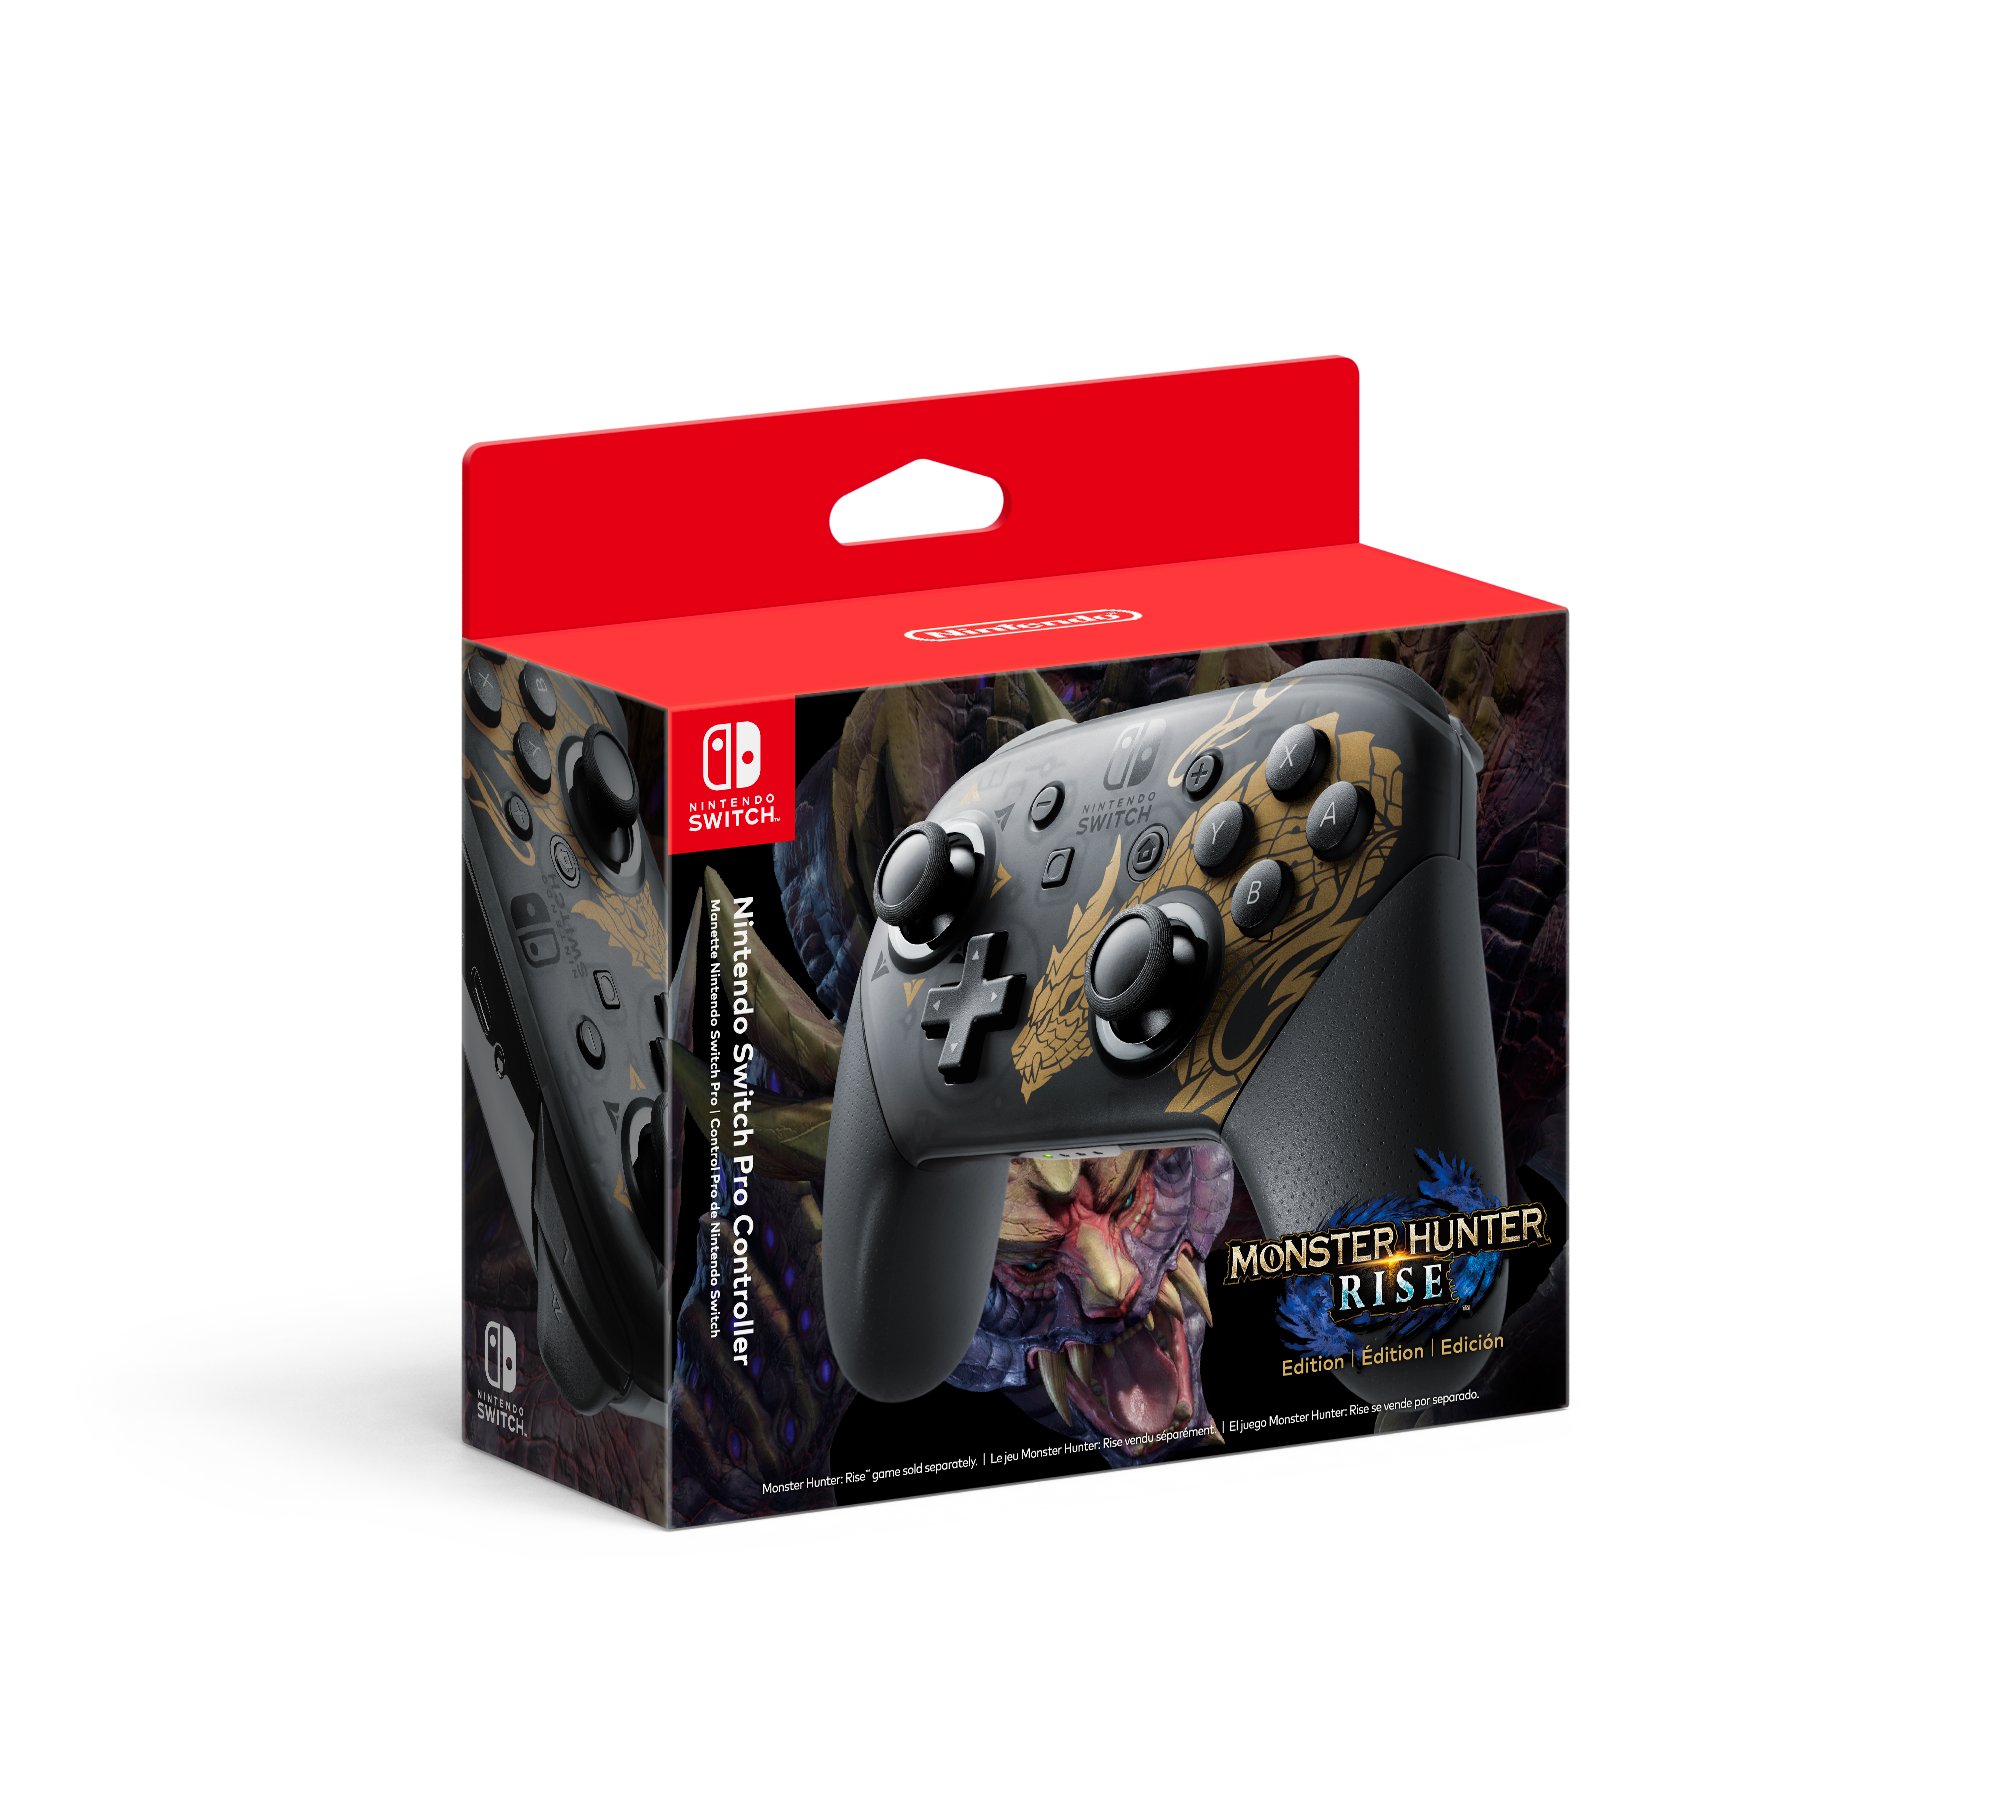 Nintendo NY on Twitter: "Stop by #NintendoNYC on Friday, 3/26 to purchase  the #NintendoSwitch Pro Controller #MonsterHunterRise Edition for $74.99.  https://t.co/rjGkwlhmsL" / Twitter